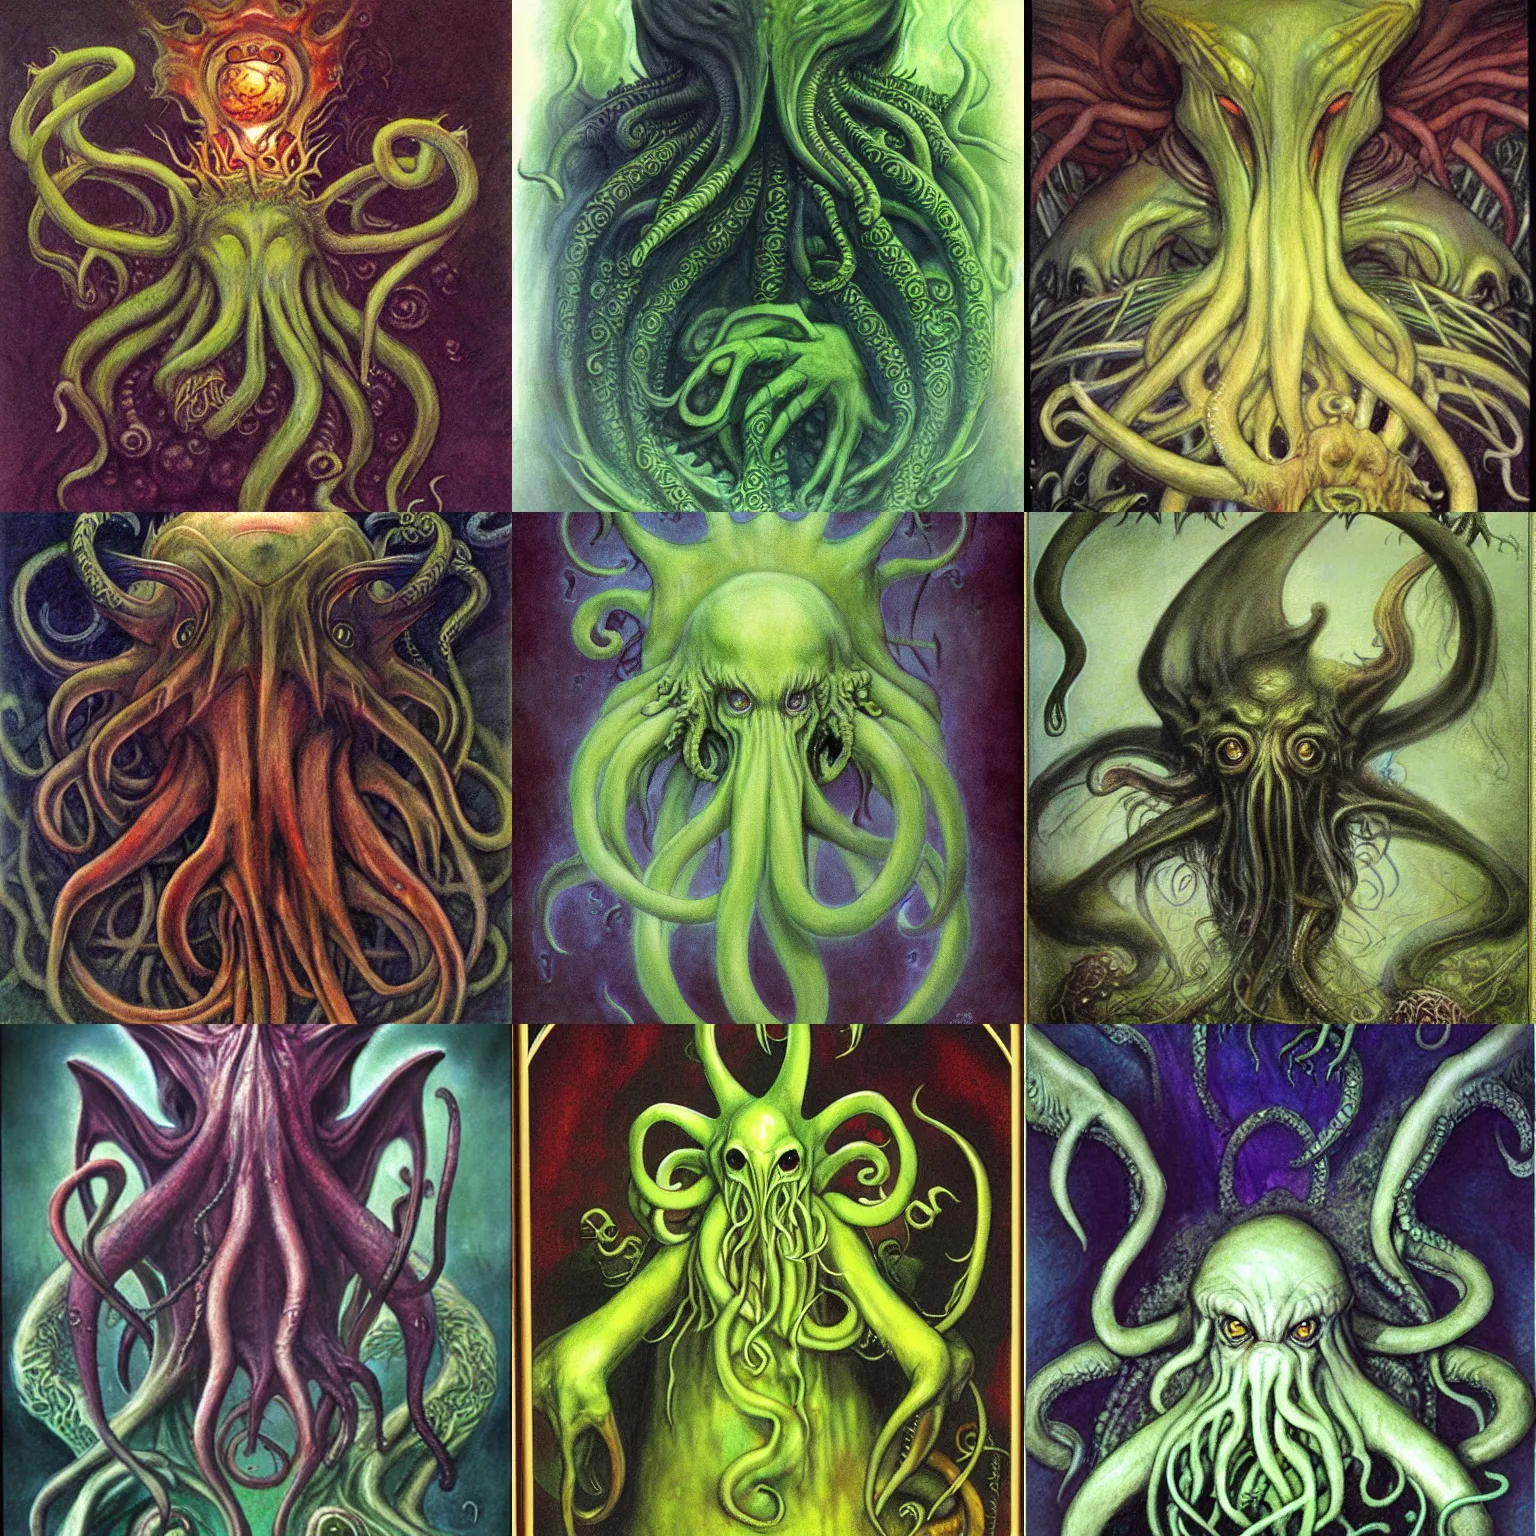 Prompt: Cthulhu by Brian Froud